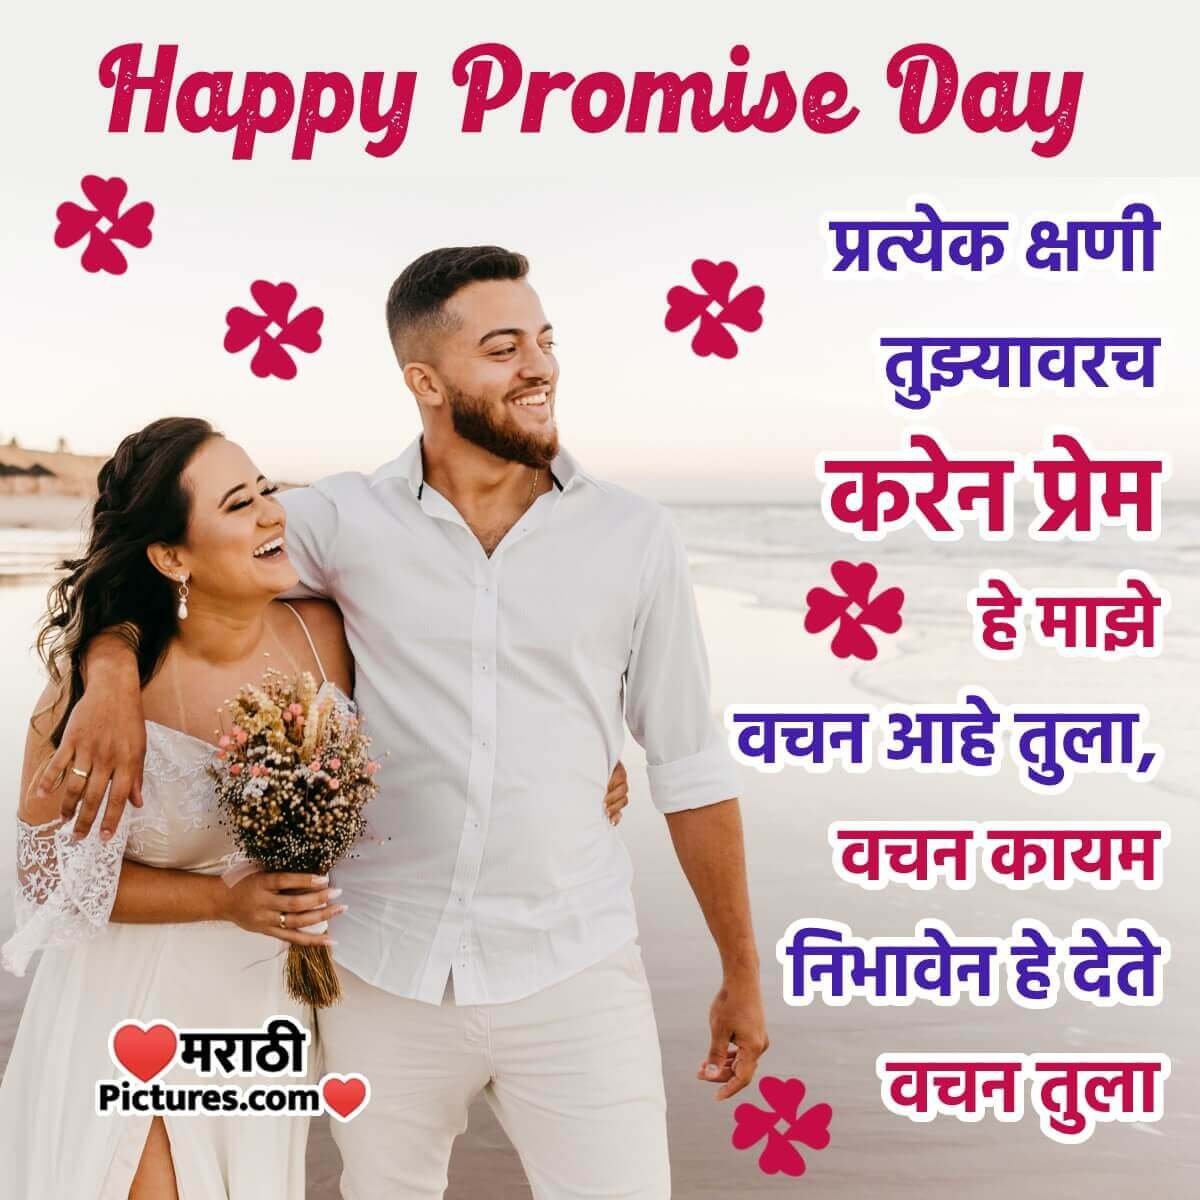 Happy Promise Day Message Photo For Gf